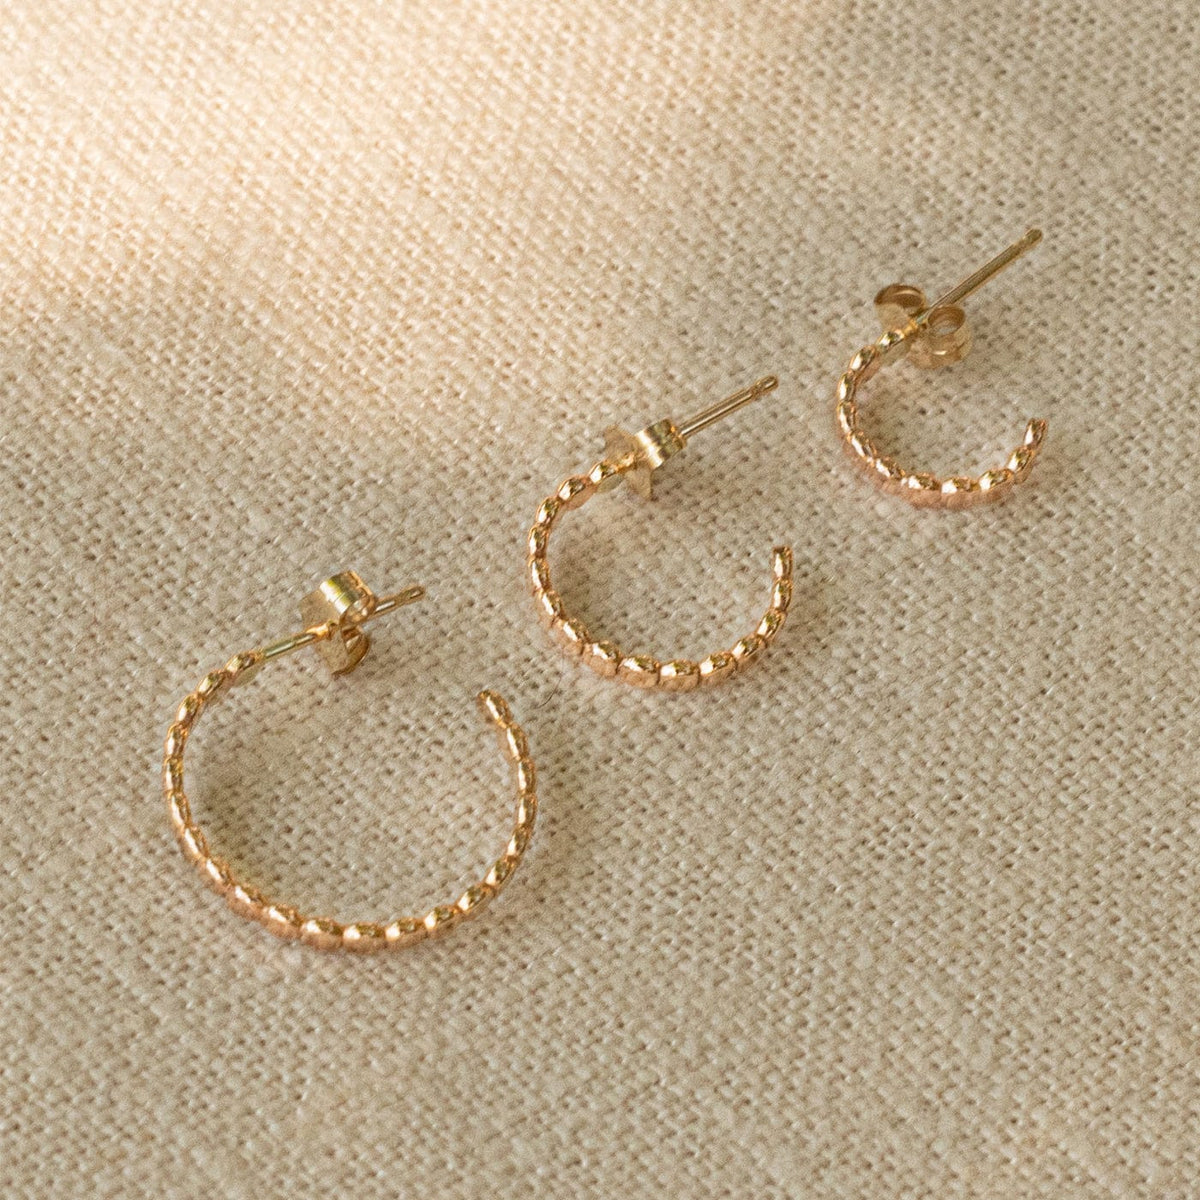 Made By Mary Poppy Hoop Earrings | Delicate, Perfect Everyday Staple